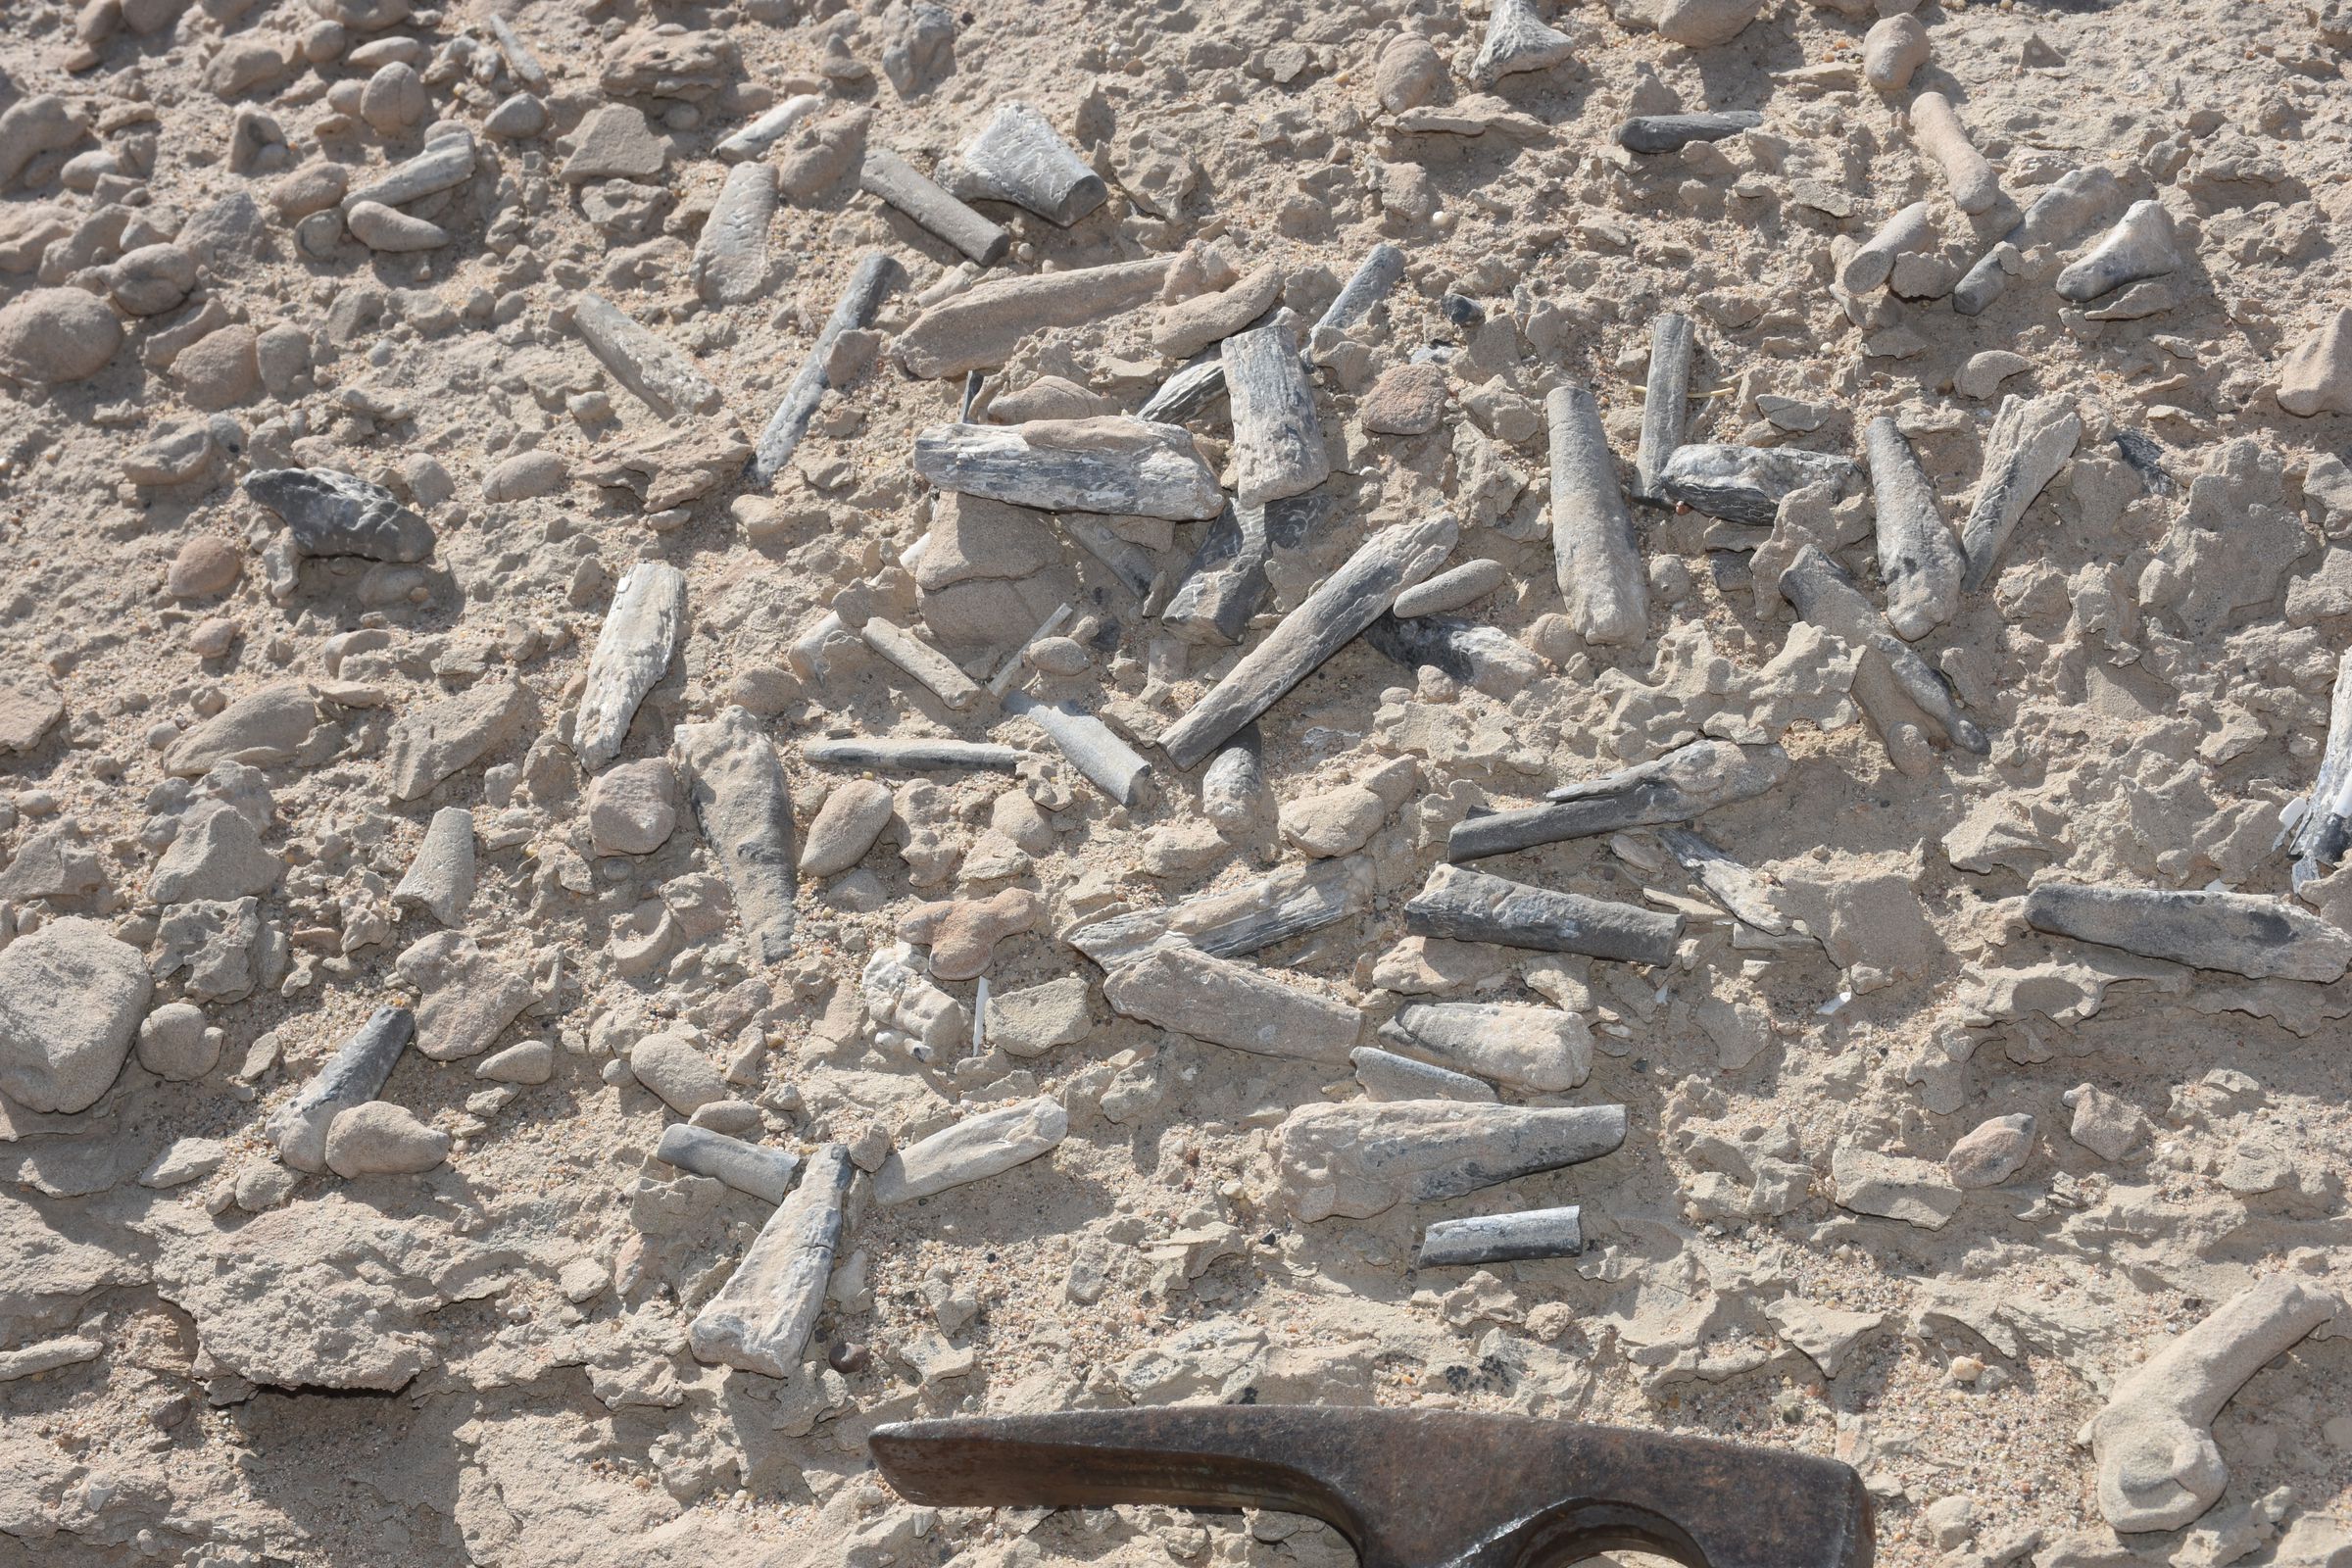 Hundreds of pterosaur bones laying on the surface, demonstrating the richness of these sites.